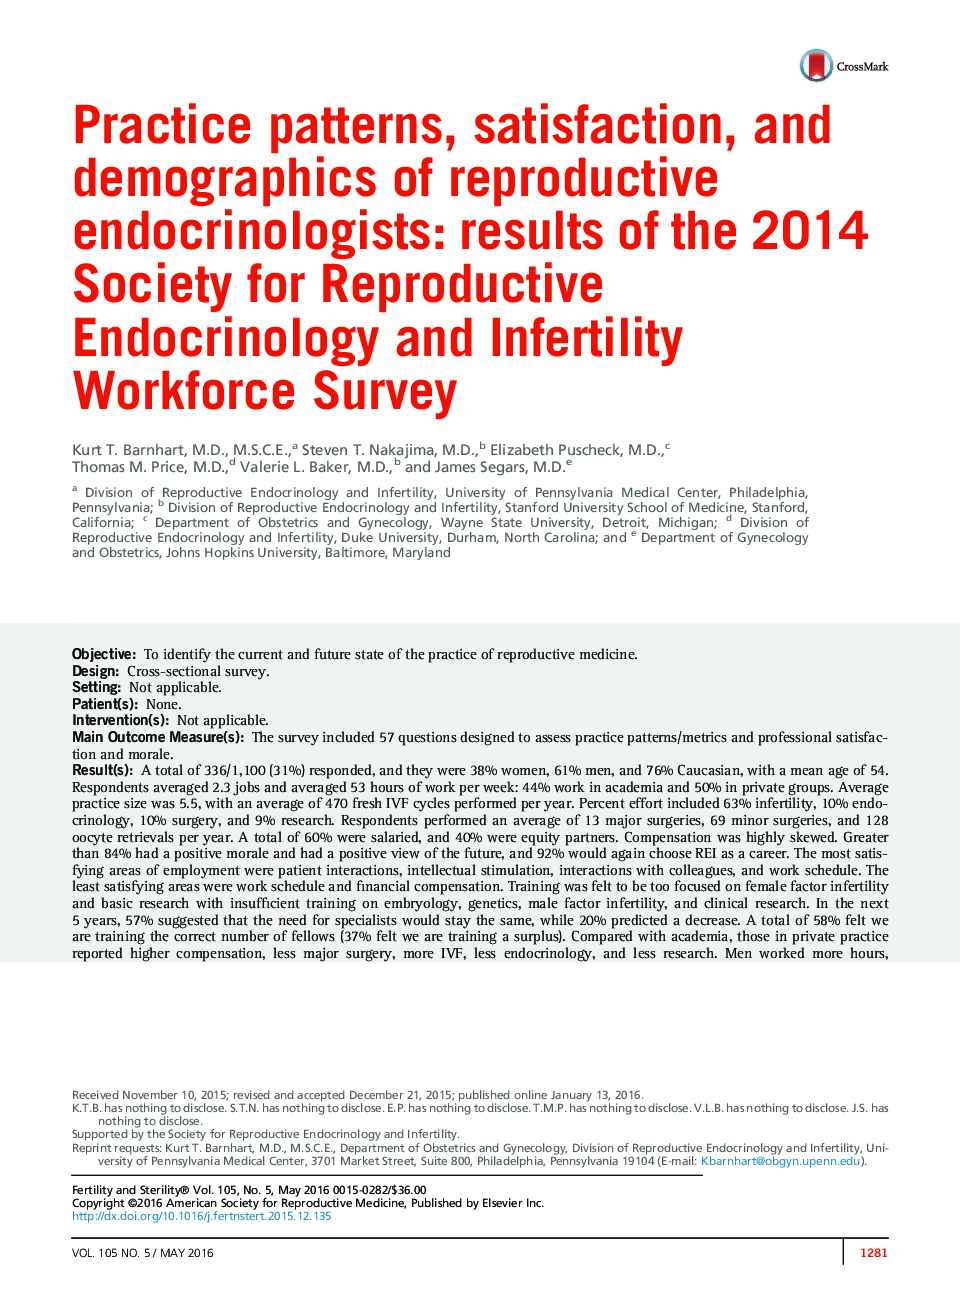 Practice patterns, satisfaction, and demographics of reproductive endocrinologists: results of the 2014 Society for Reproductive Endocrinology and Infertility Workforce Survey